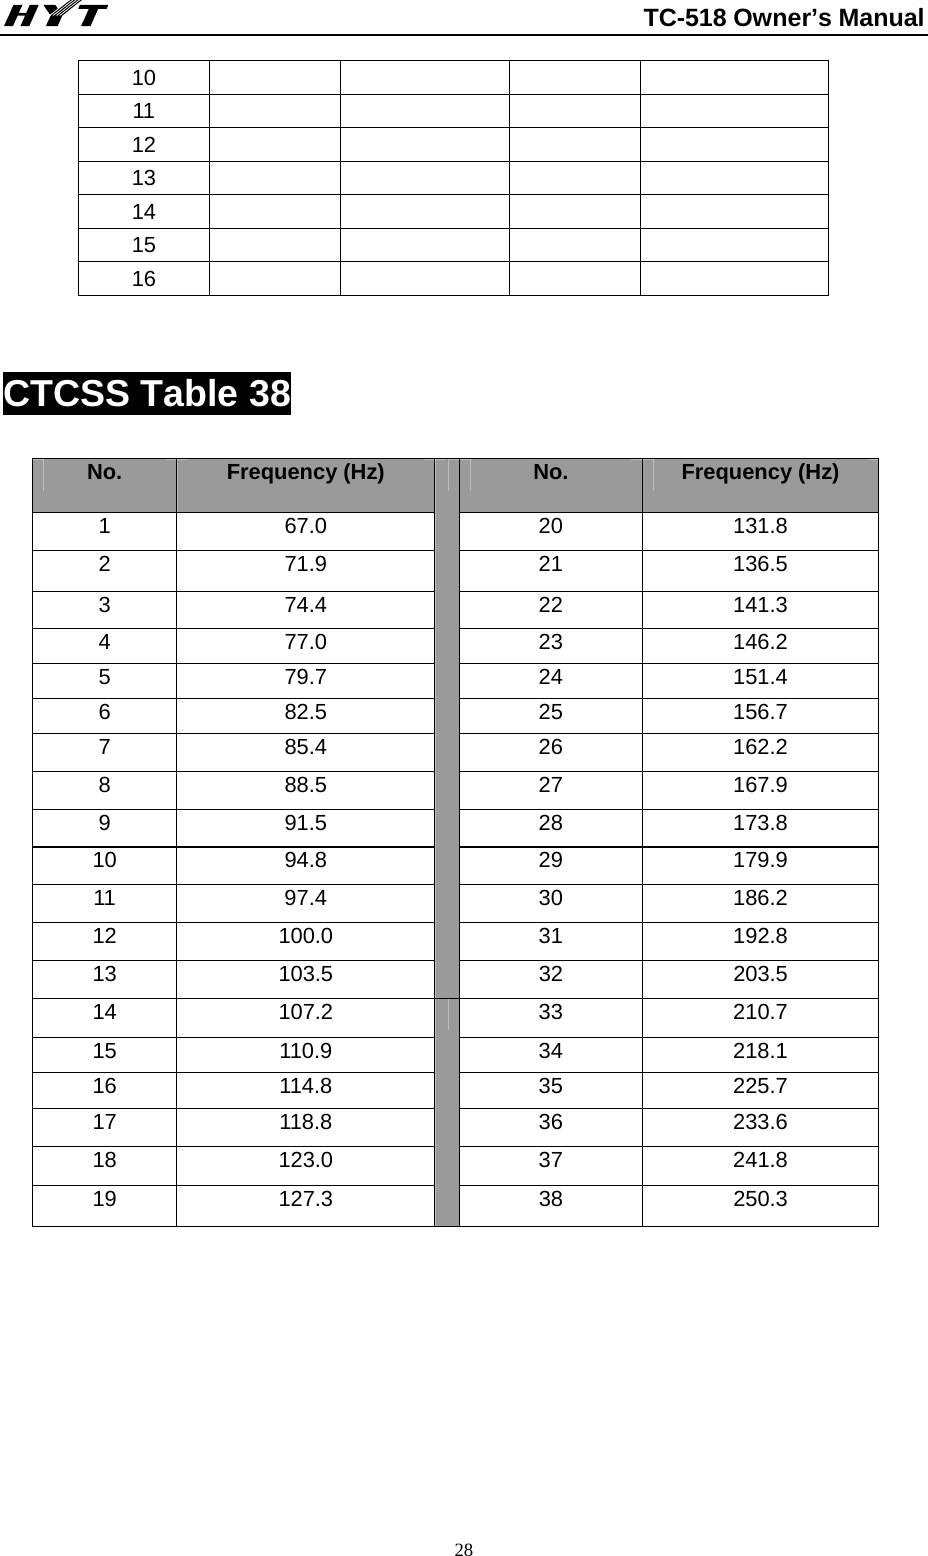                                                          TC-518 Owner’s Manual  2810      11      12      13      14      15      16       CTCSS Table 38 No.  Frequency (Hz)  No.  Frequency (Hz) 1 67.0  20 131.8 2 71.9  21 136.5 3 74.4  22 141.3 4 77.0  23 146.2 5 79.7  24 151.4 6 82.5  25 156.7 7 85.4  26 162.2 8 88.5  27 167.9 9 91.5  28 173.8 10 94.8  29 179.9 11 97.4  30 186.2 12 100.0  31  192.8 13 103.5  32 203.5 14 107.2  33  210.7 15 110.9  34  218.1 16 114.8  35  225.7 17 118.8  36  233.6 18 123.0  37  241.8 19 127.3  38 250.3       